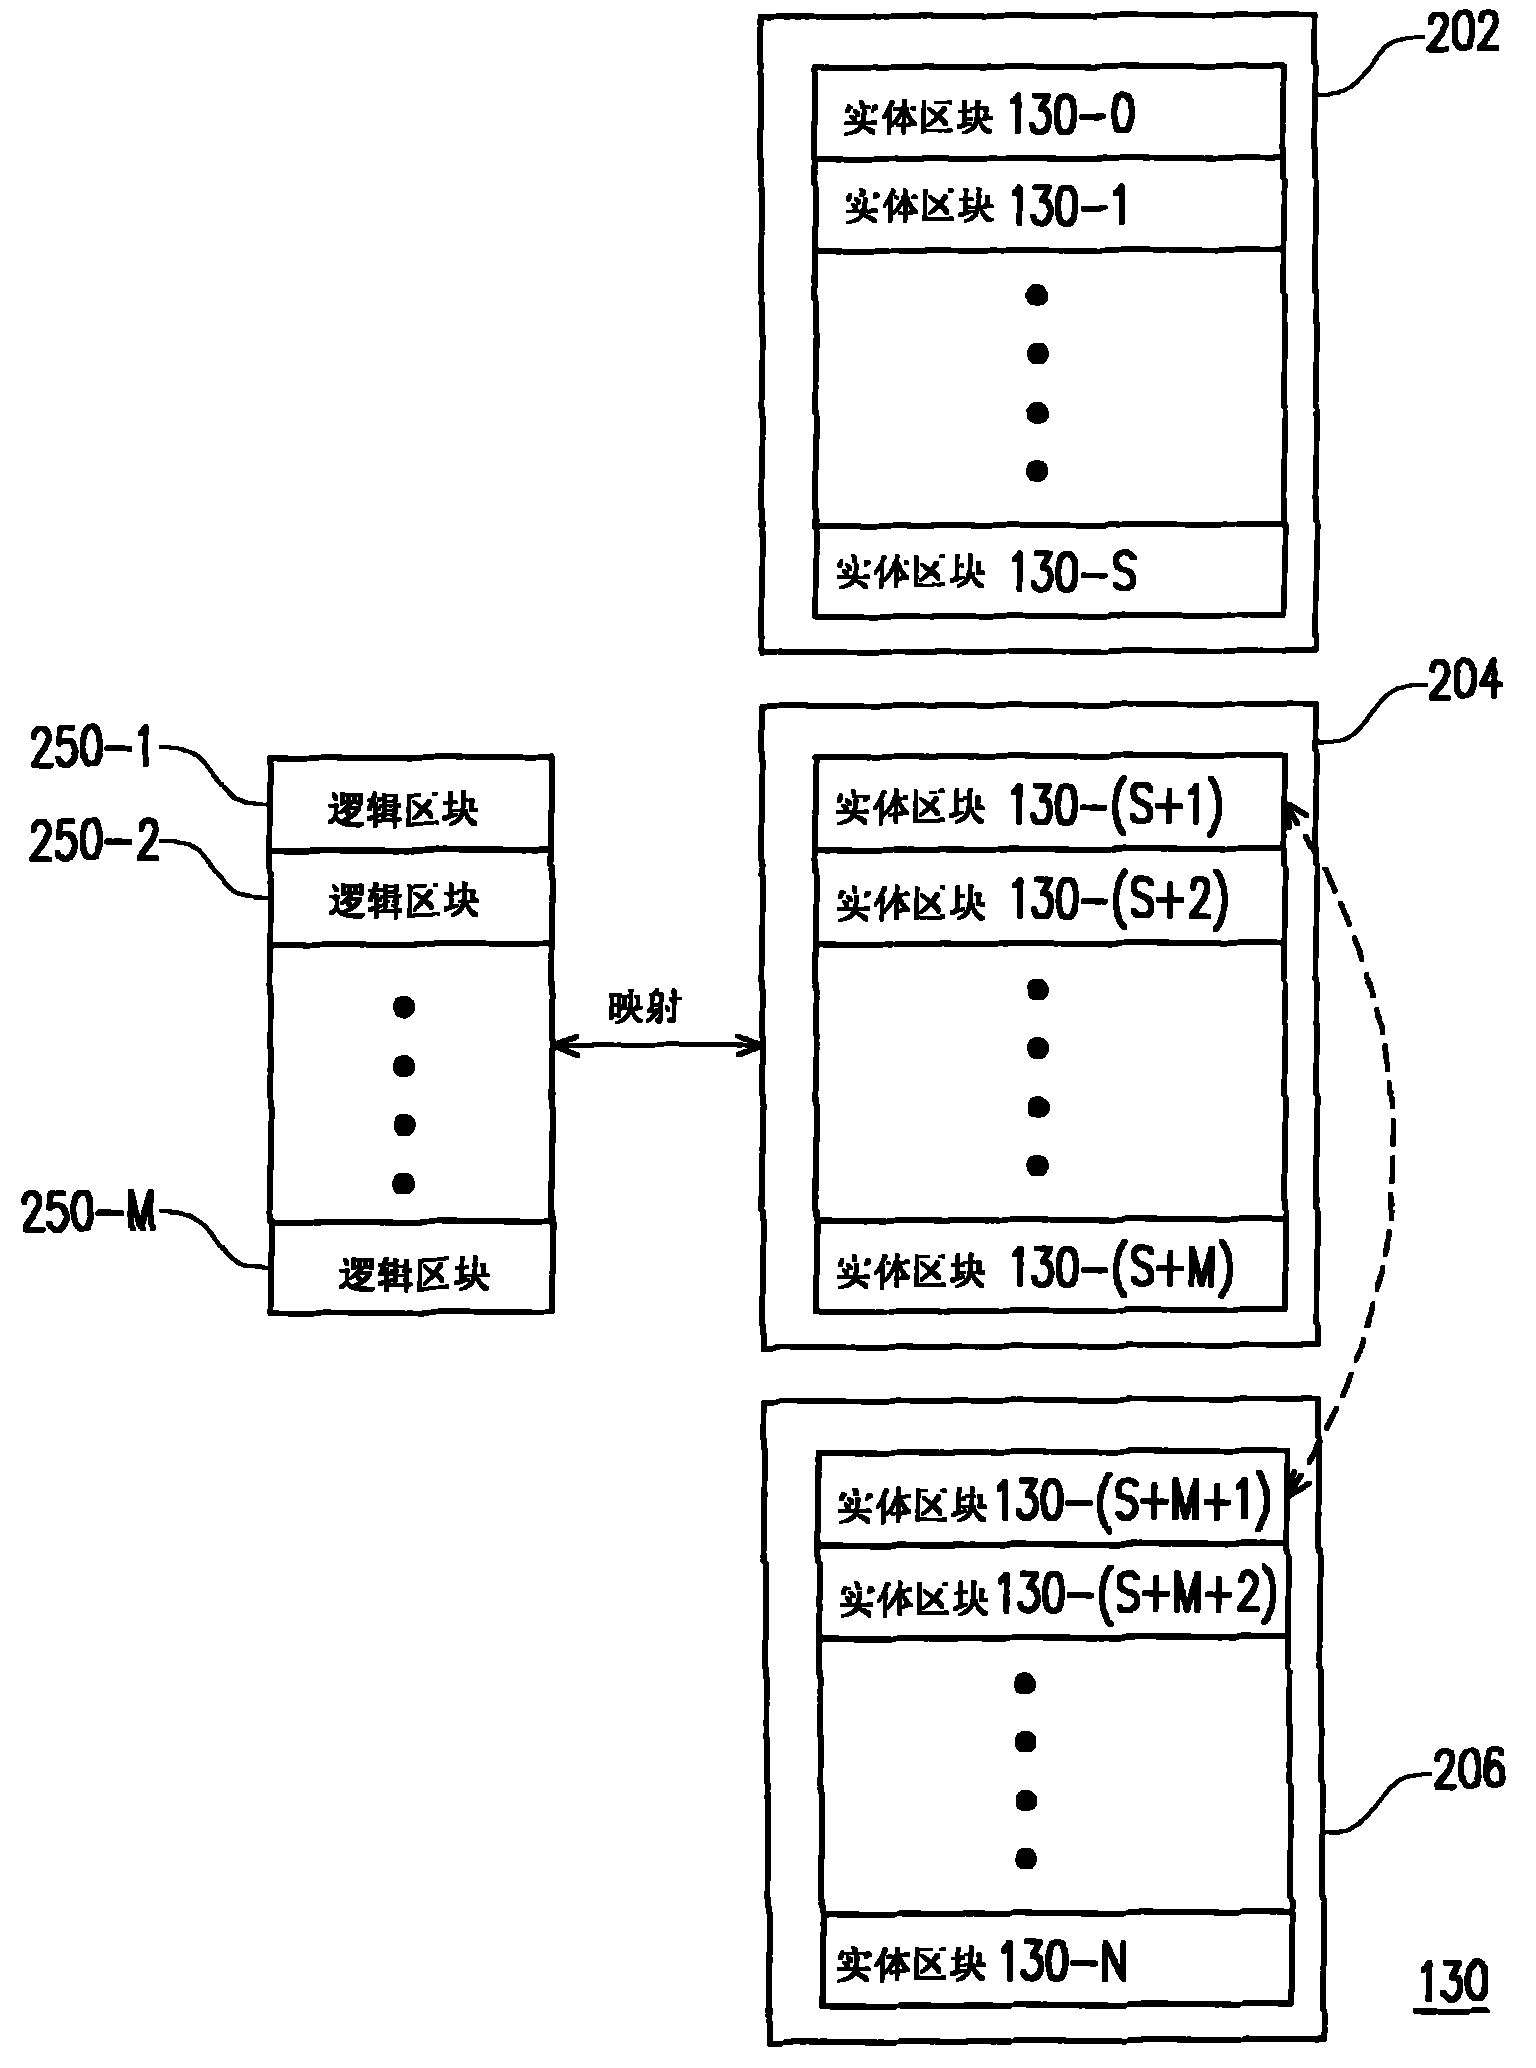 Data storage method and storage system for flash memory